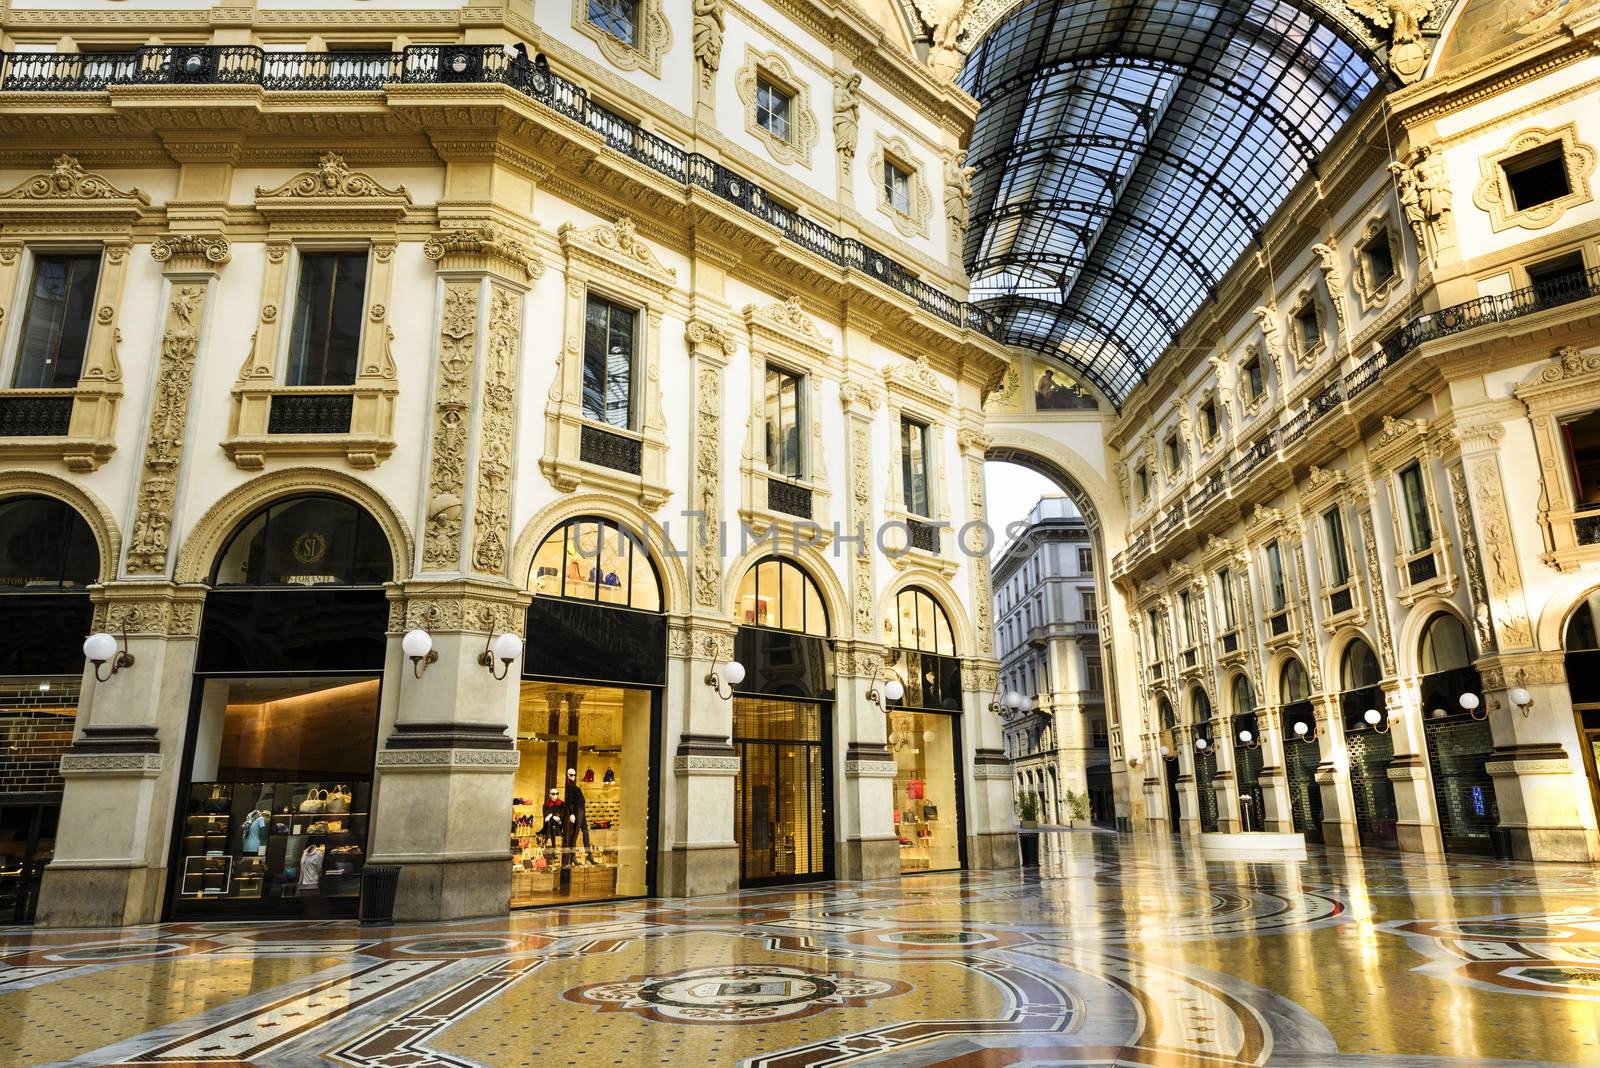 in the heart of Milan, Italy by ventdusud